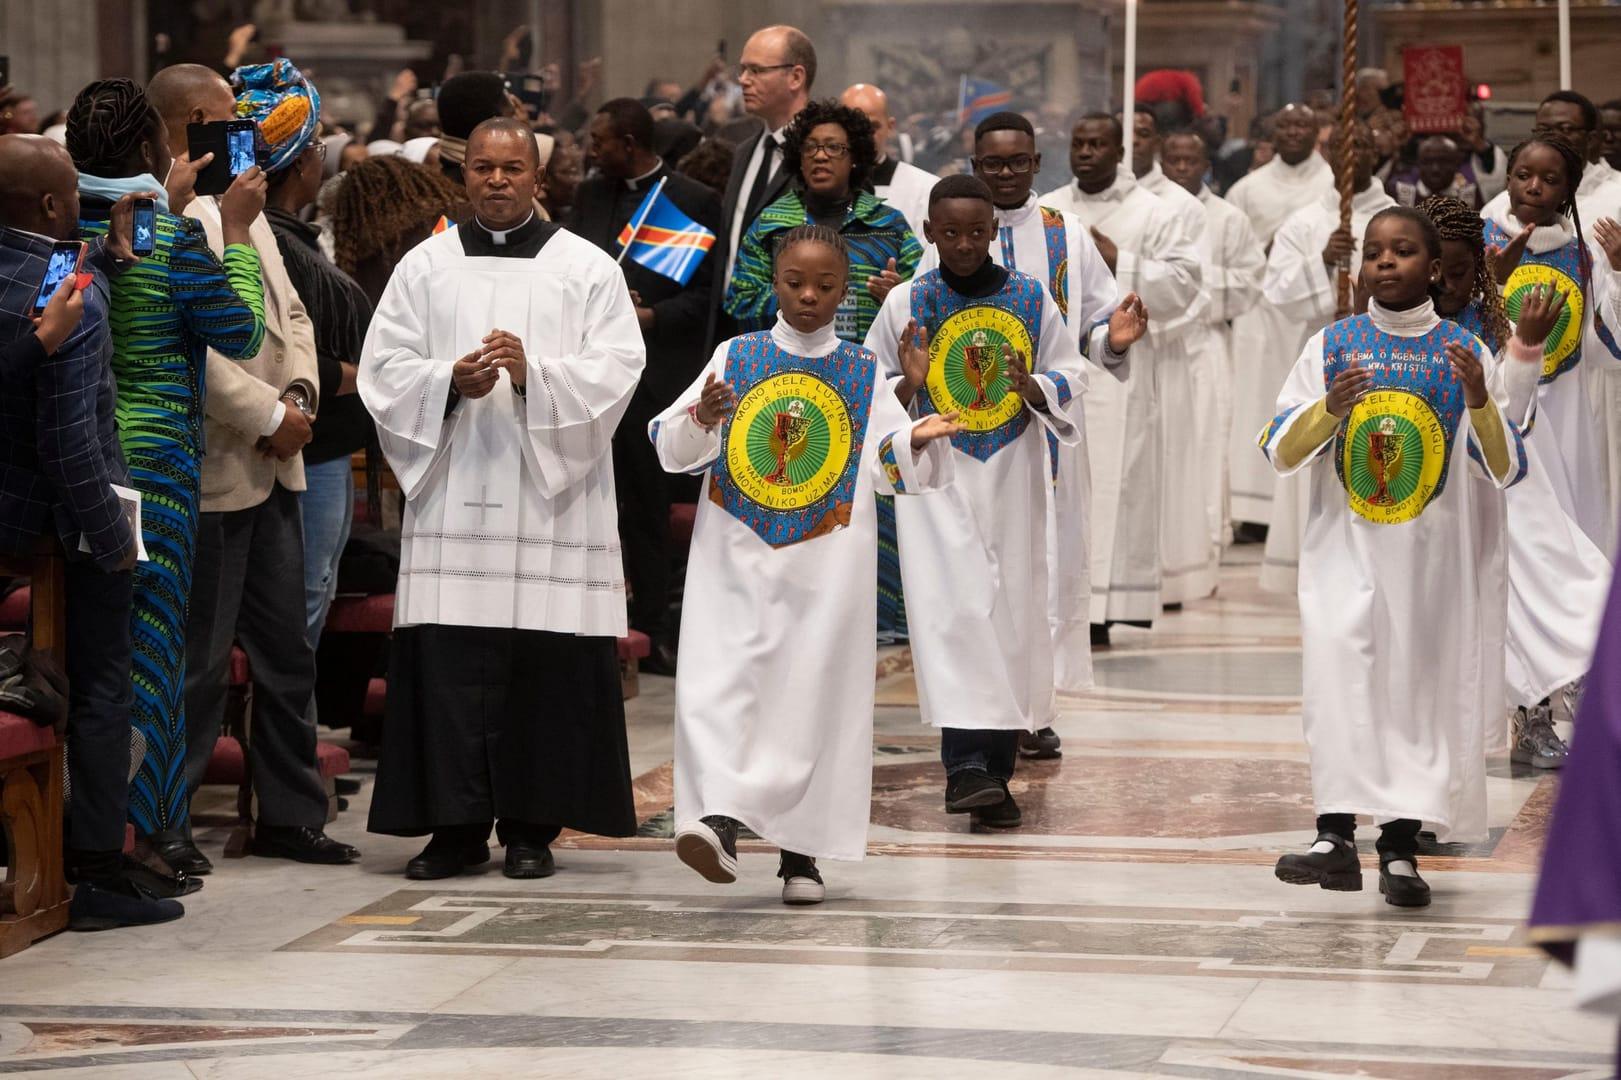 Zaire rite was ‘hugely important’ step in true liturgical inculturation, academic says